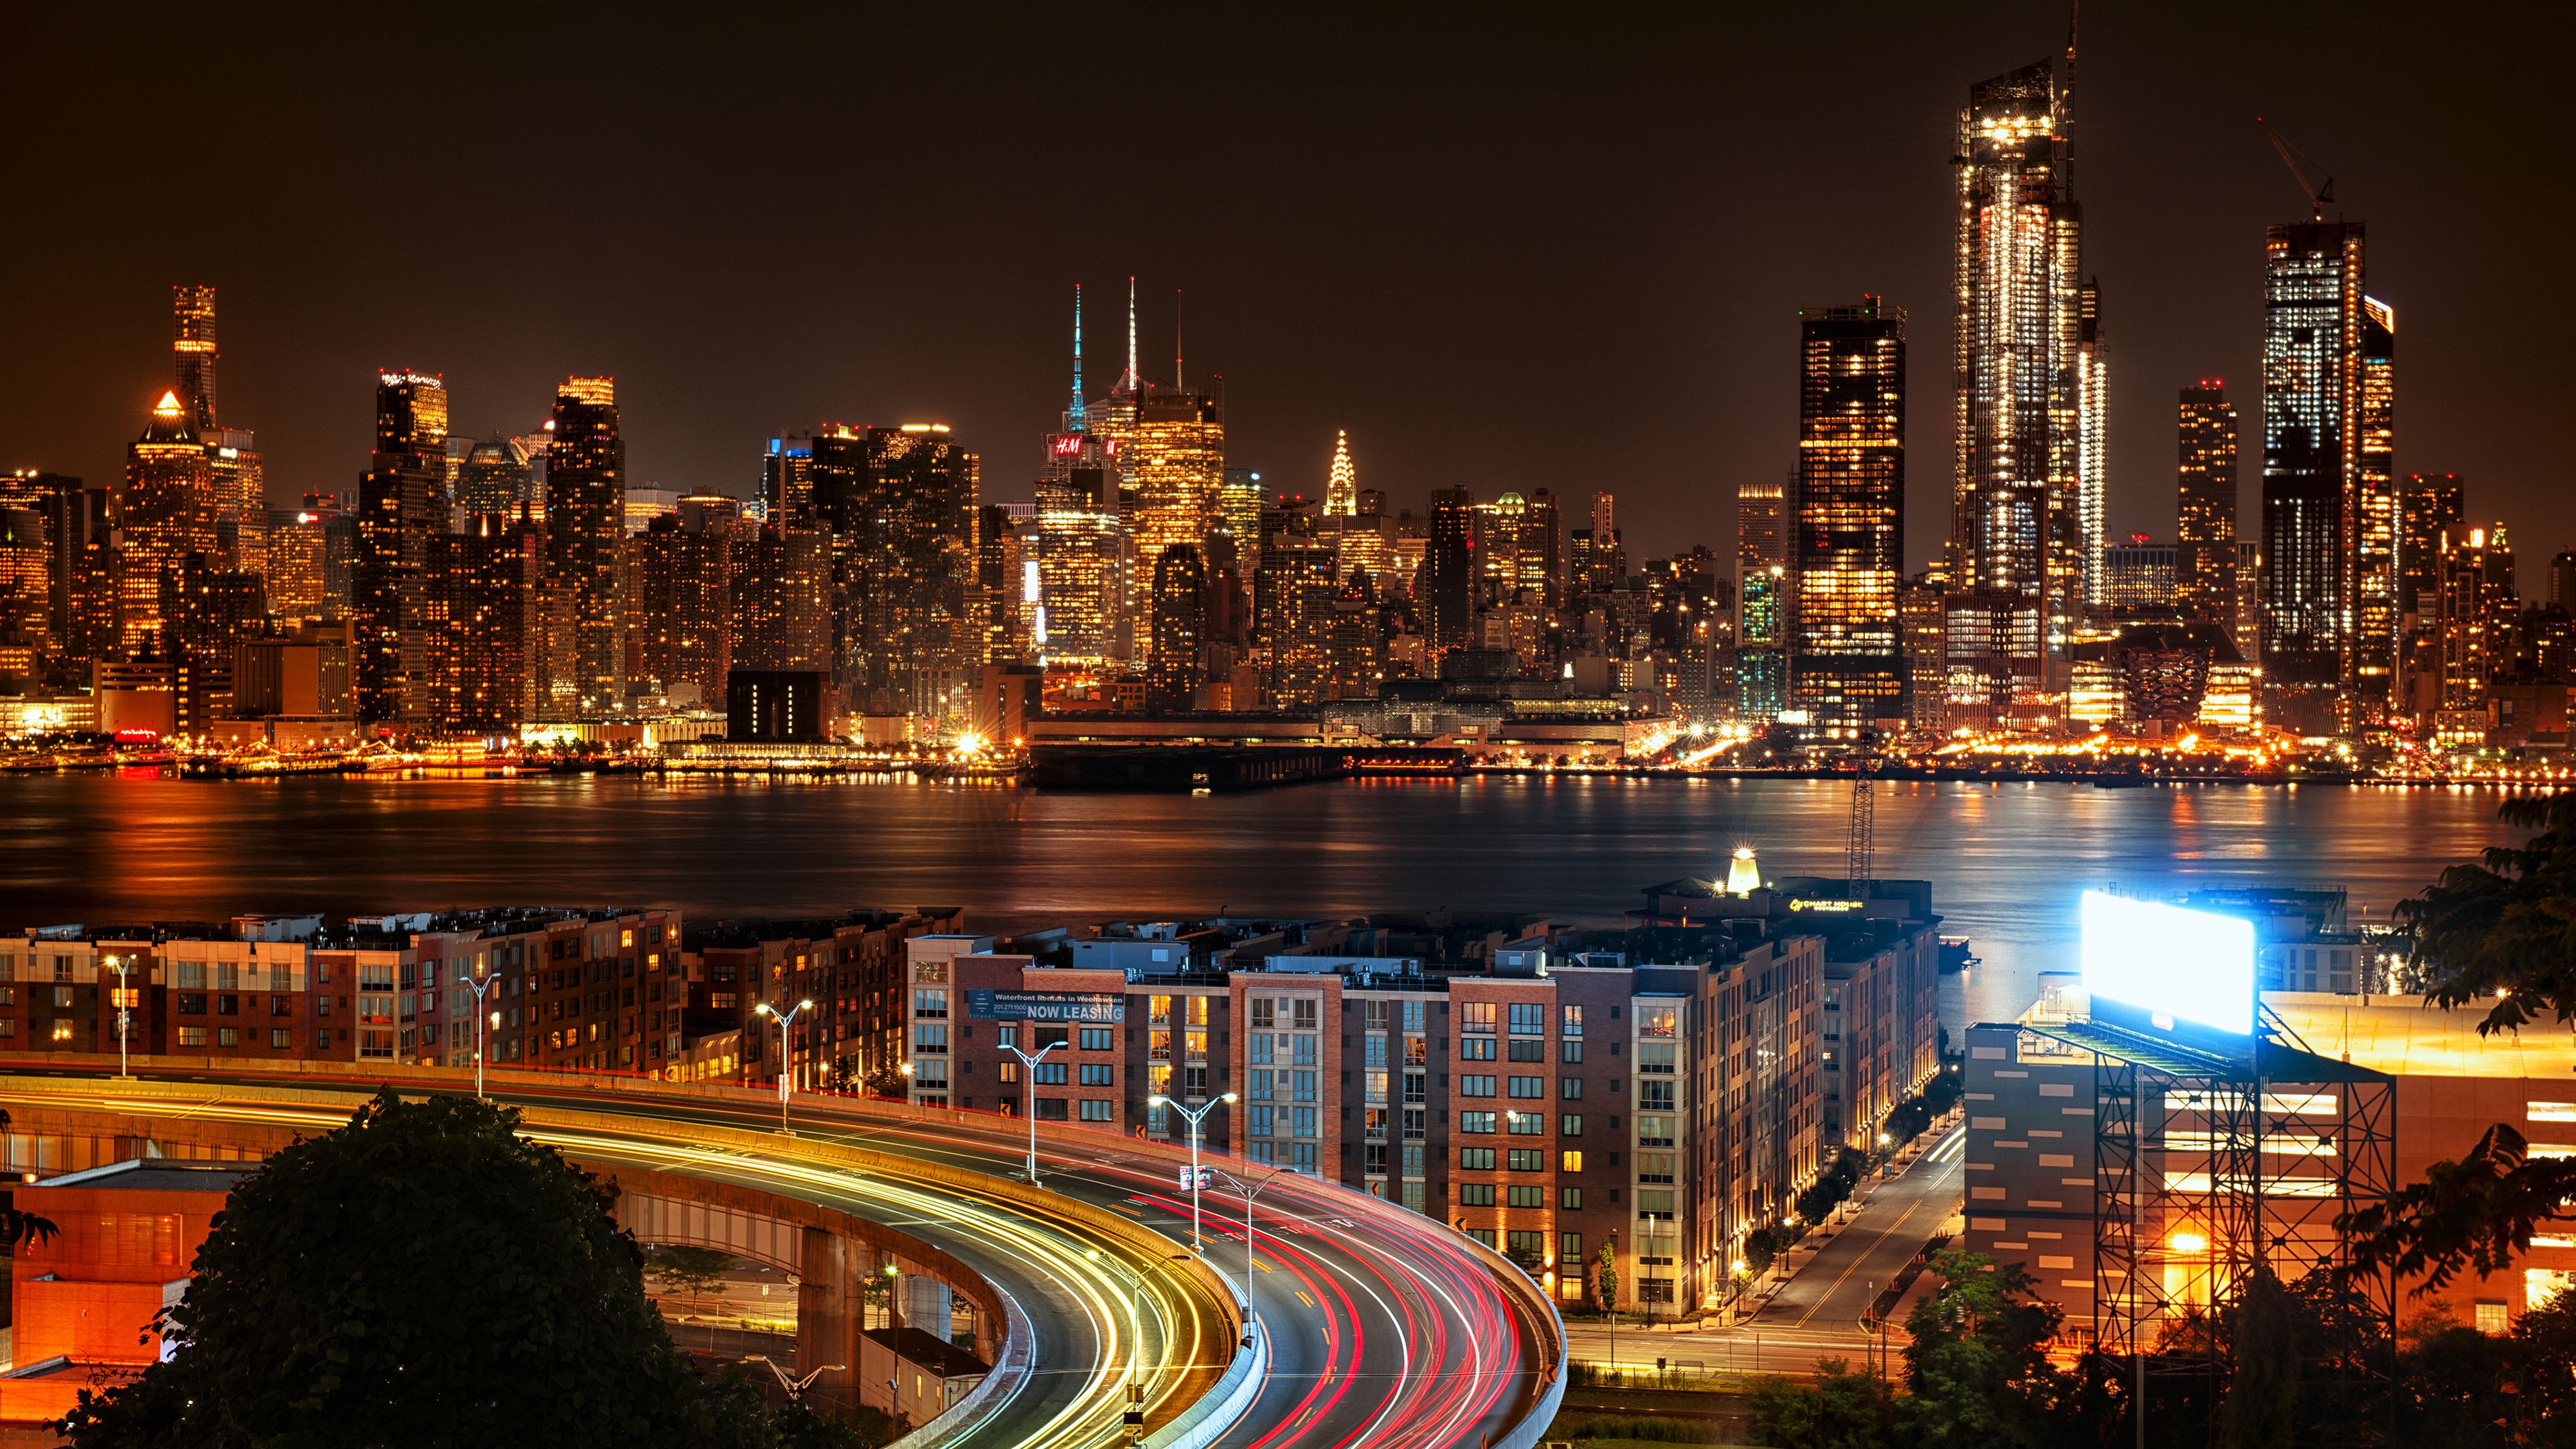 Wallpaper 4k New York City View From New Jersey 4k At Night 4k Wallpaper, City Wallpaper, Hd Wallpaper, New Jersey Wallpaper, New York Wallpaper, Night Wallpaper, World Wallpaper